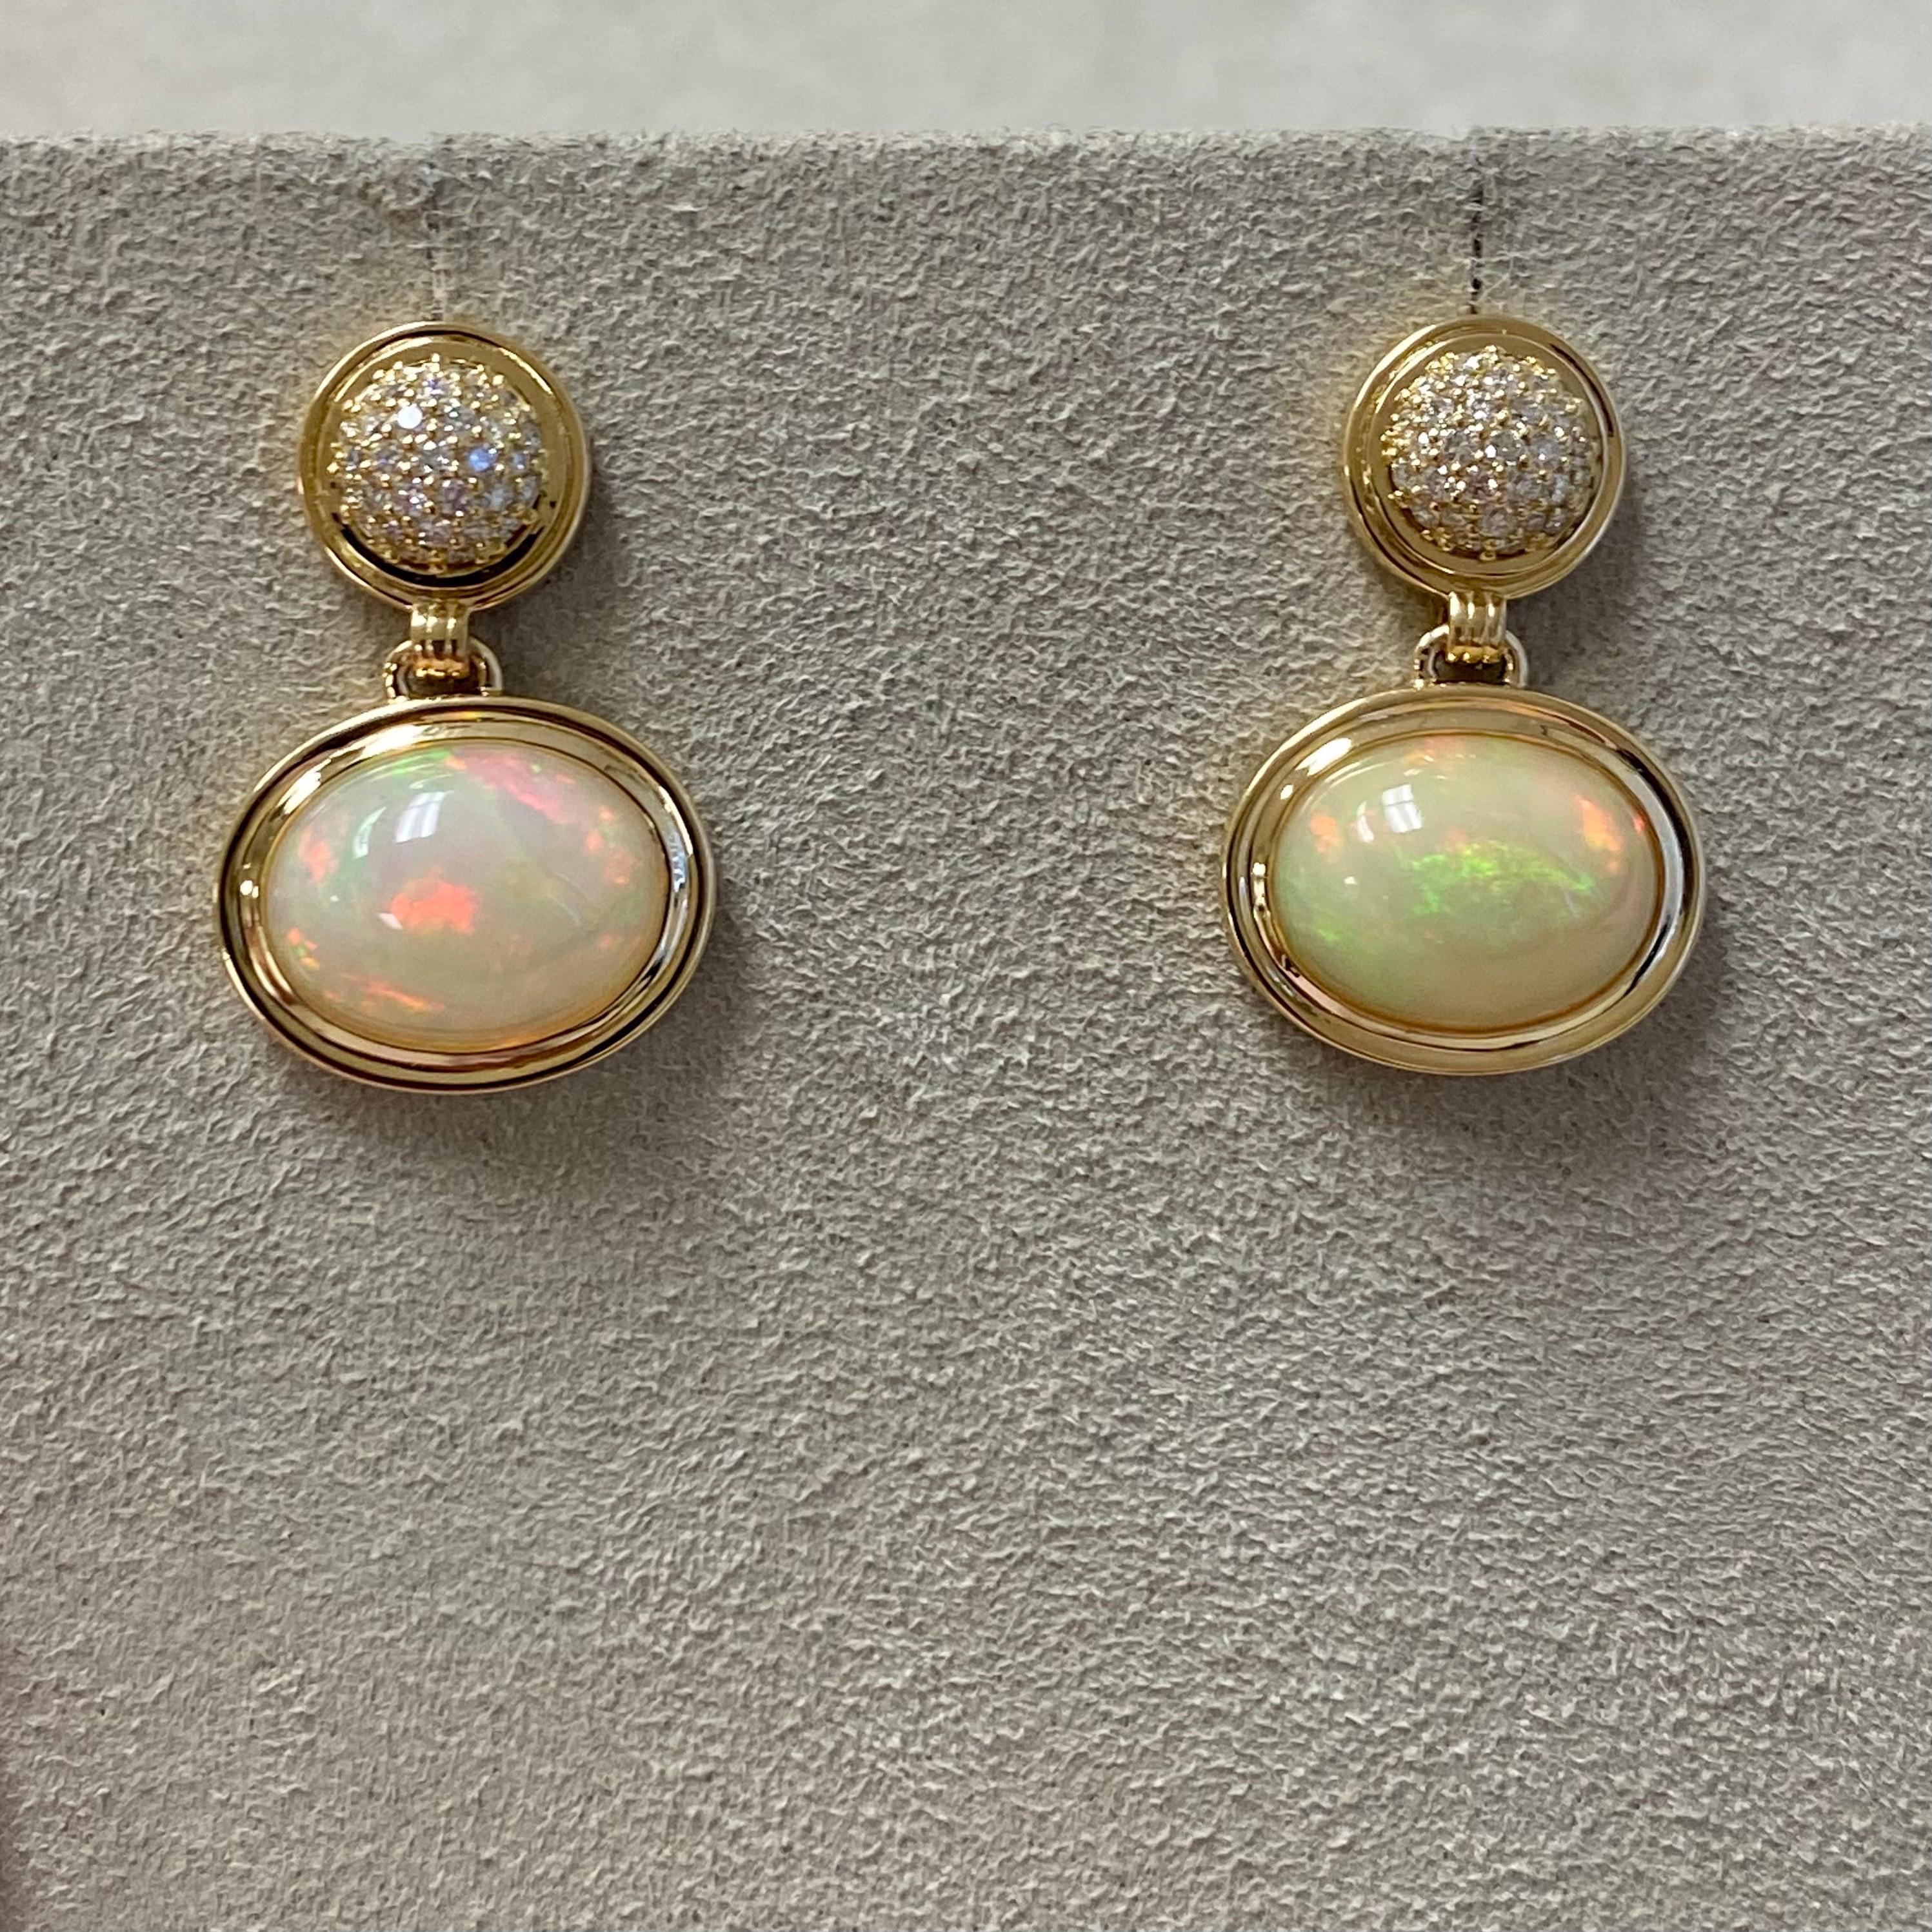 Created in 18 karat yellow gold
Ethiopian Opal 9 carats approx.
Champagne Diamonds 0.40 carat approx.
18kyg Butterfly backs
Limited Edition


About the Designers

Drawing inspiration from little things, Dharmesh & Namrata Kothari have created an